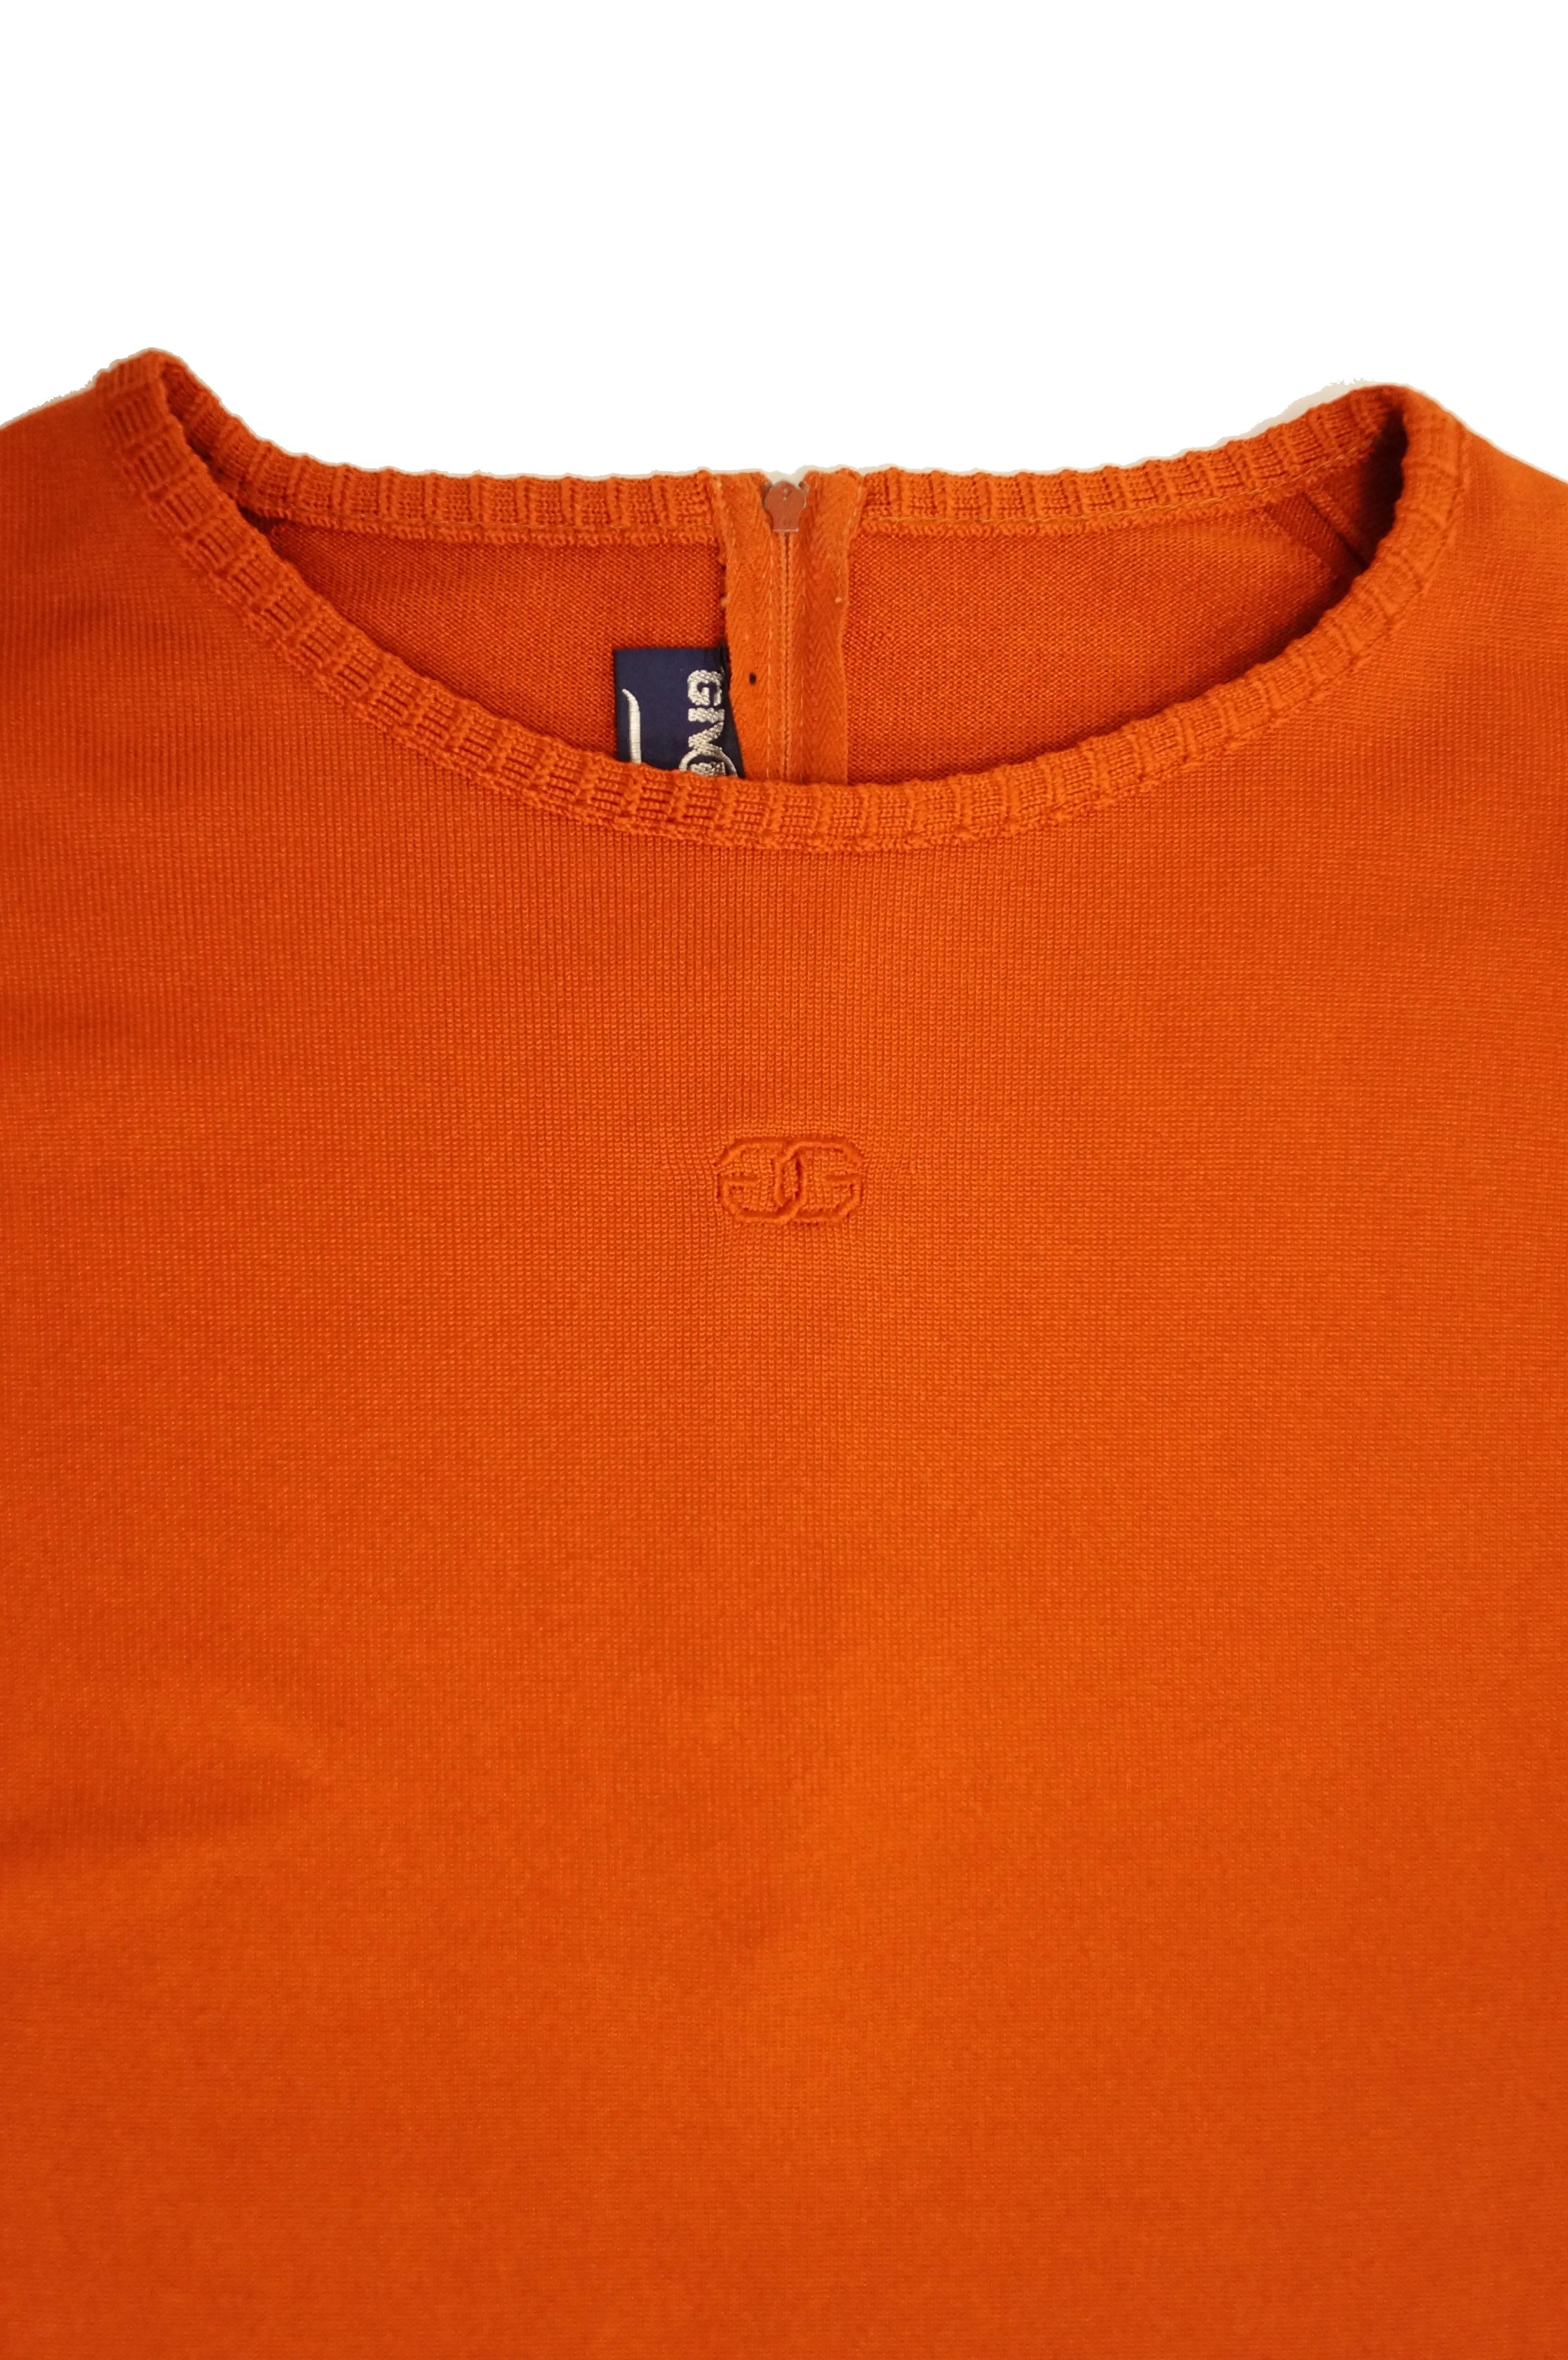 Fabulous bright orange knit sweater by Hubert de Givenchy! The sweater has long sleeves, a loose jewel neck collar, and hits slightly above the hip. The famous Givenchy logo is featured on the front of the sweater, at the center of the collarbones -